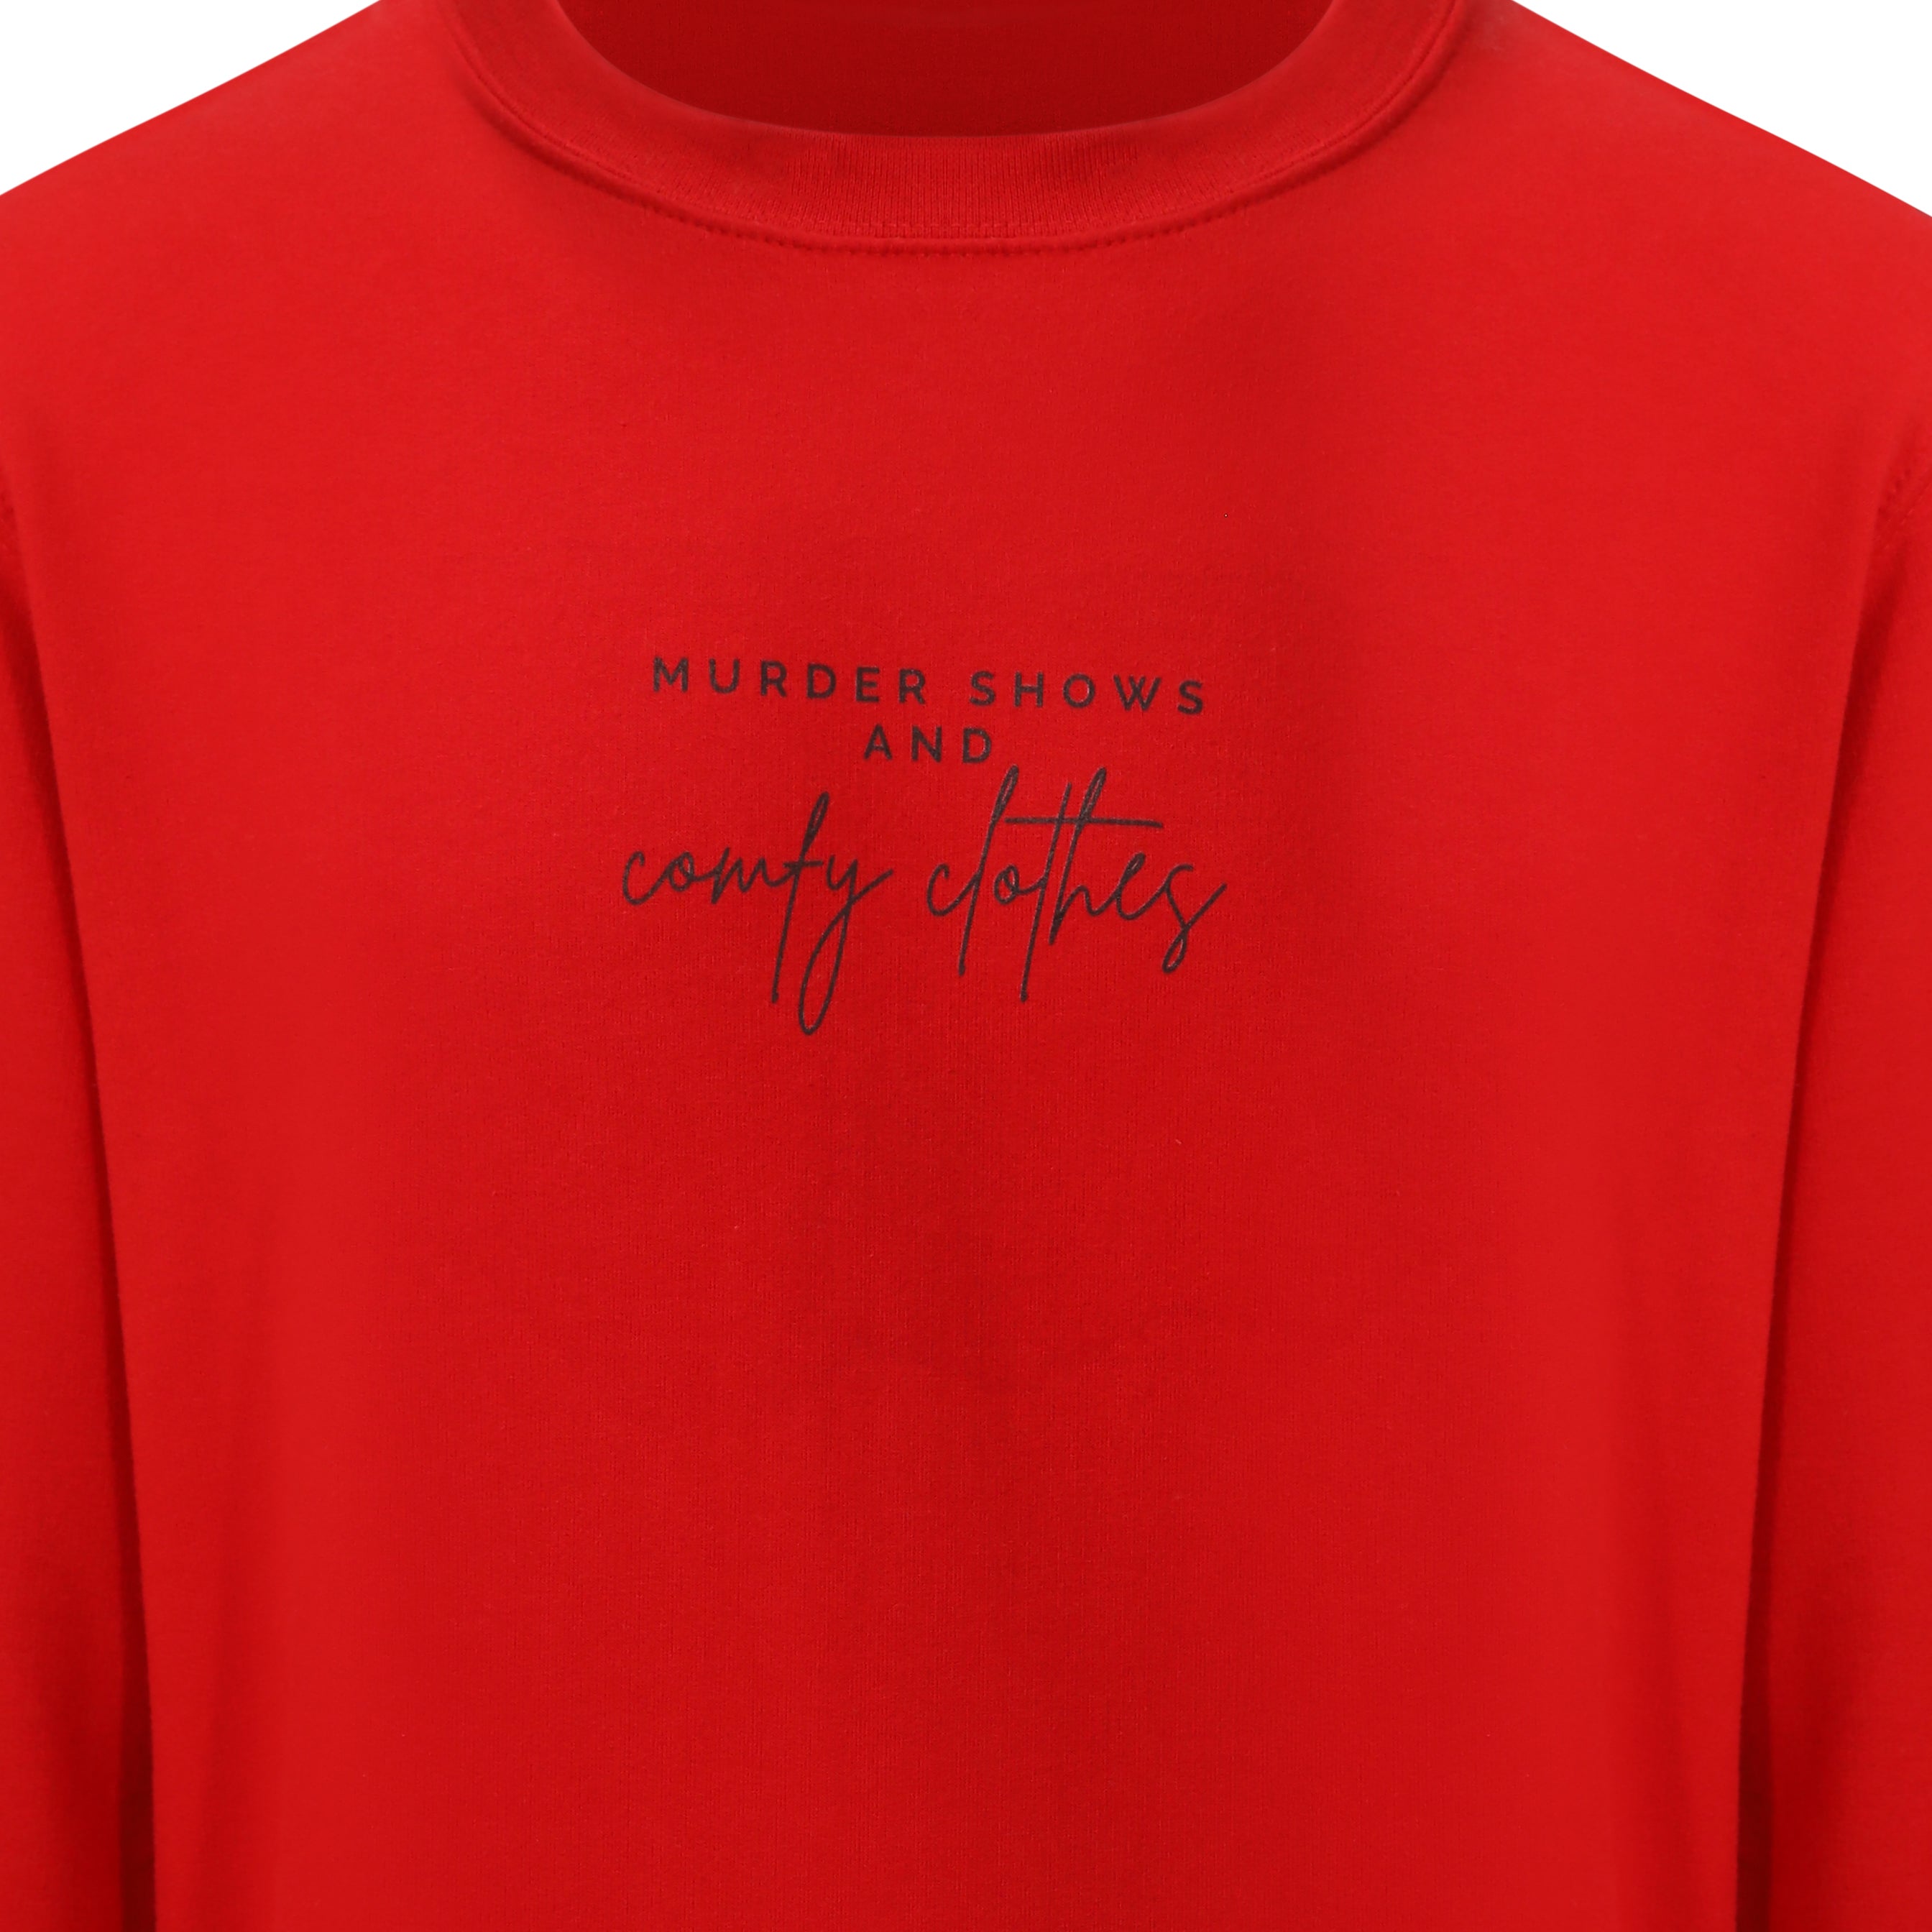 Sweatshirt that says: Murder shows and comfy clothes. Murder shows is in caps and sans serif style font, comfy clothes is in a handwritten style font. Text is small and placed in the centre of the chest, stretching as far as the neckline